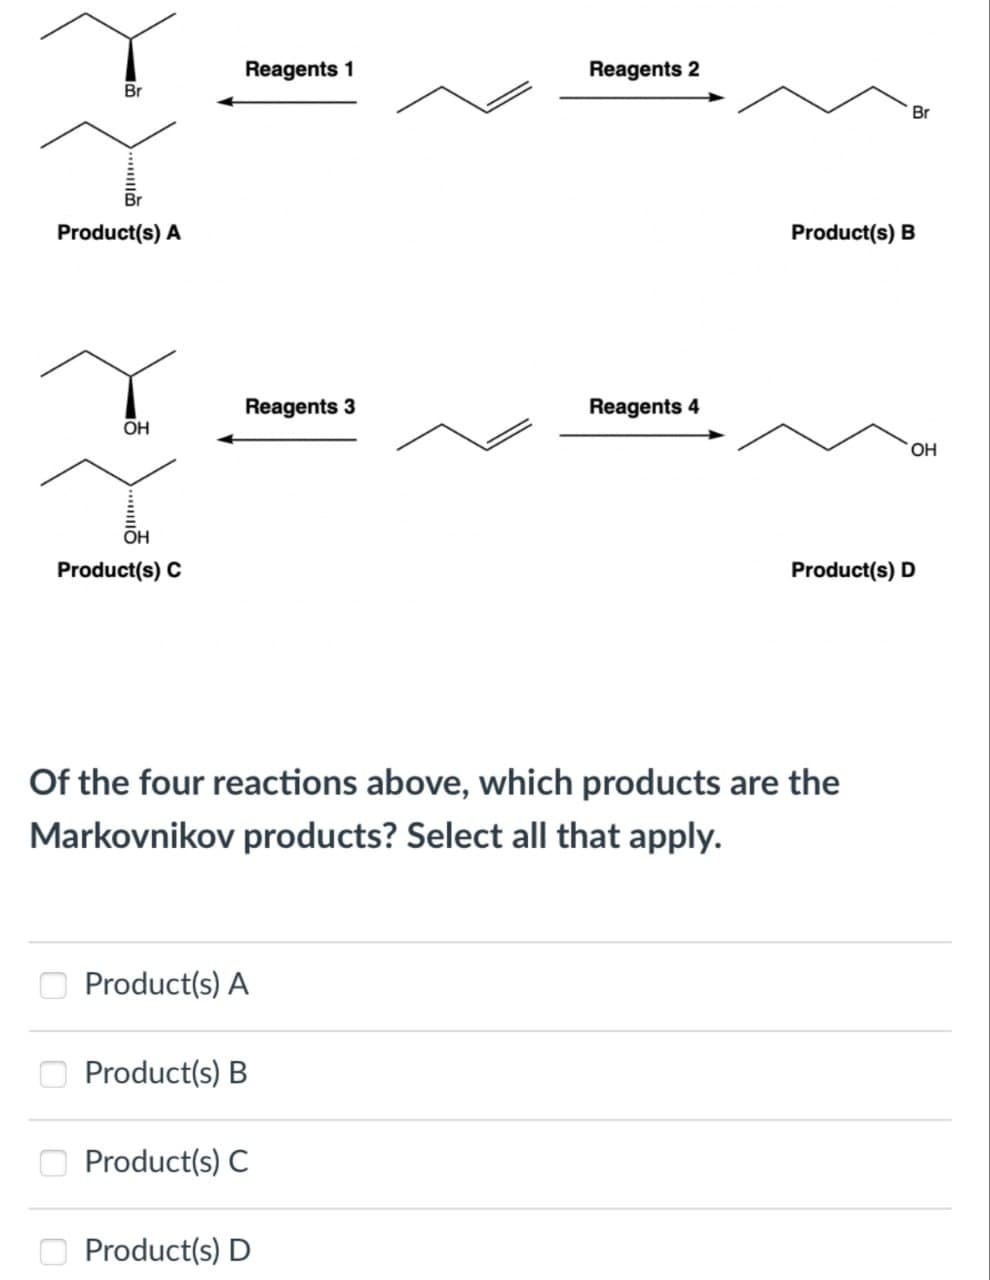 Reagents 1
Reagents 2
Br
Br
Product(s) A
Product(s) B
Reagents 3
Reagents 4
OH
OH
OH
Product(s) C
Product(s) D
Of the four reactions above, which products are the
Markovnikov products? Select all that apply.
Product(s) A
Product(s) B
Product(s) C
Product(s) D